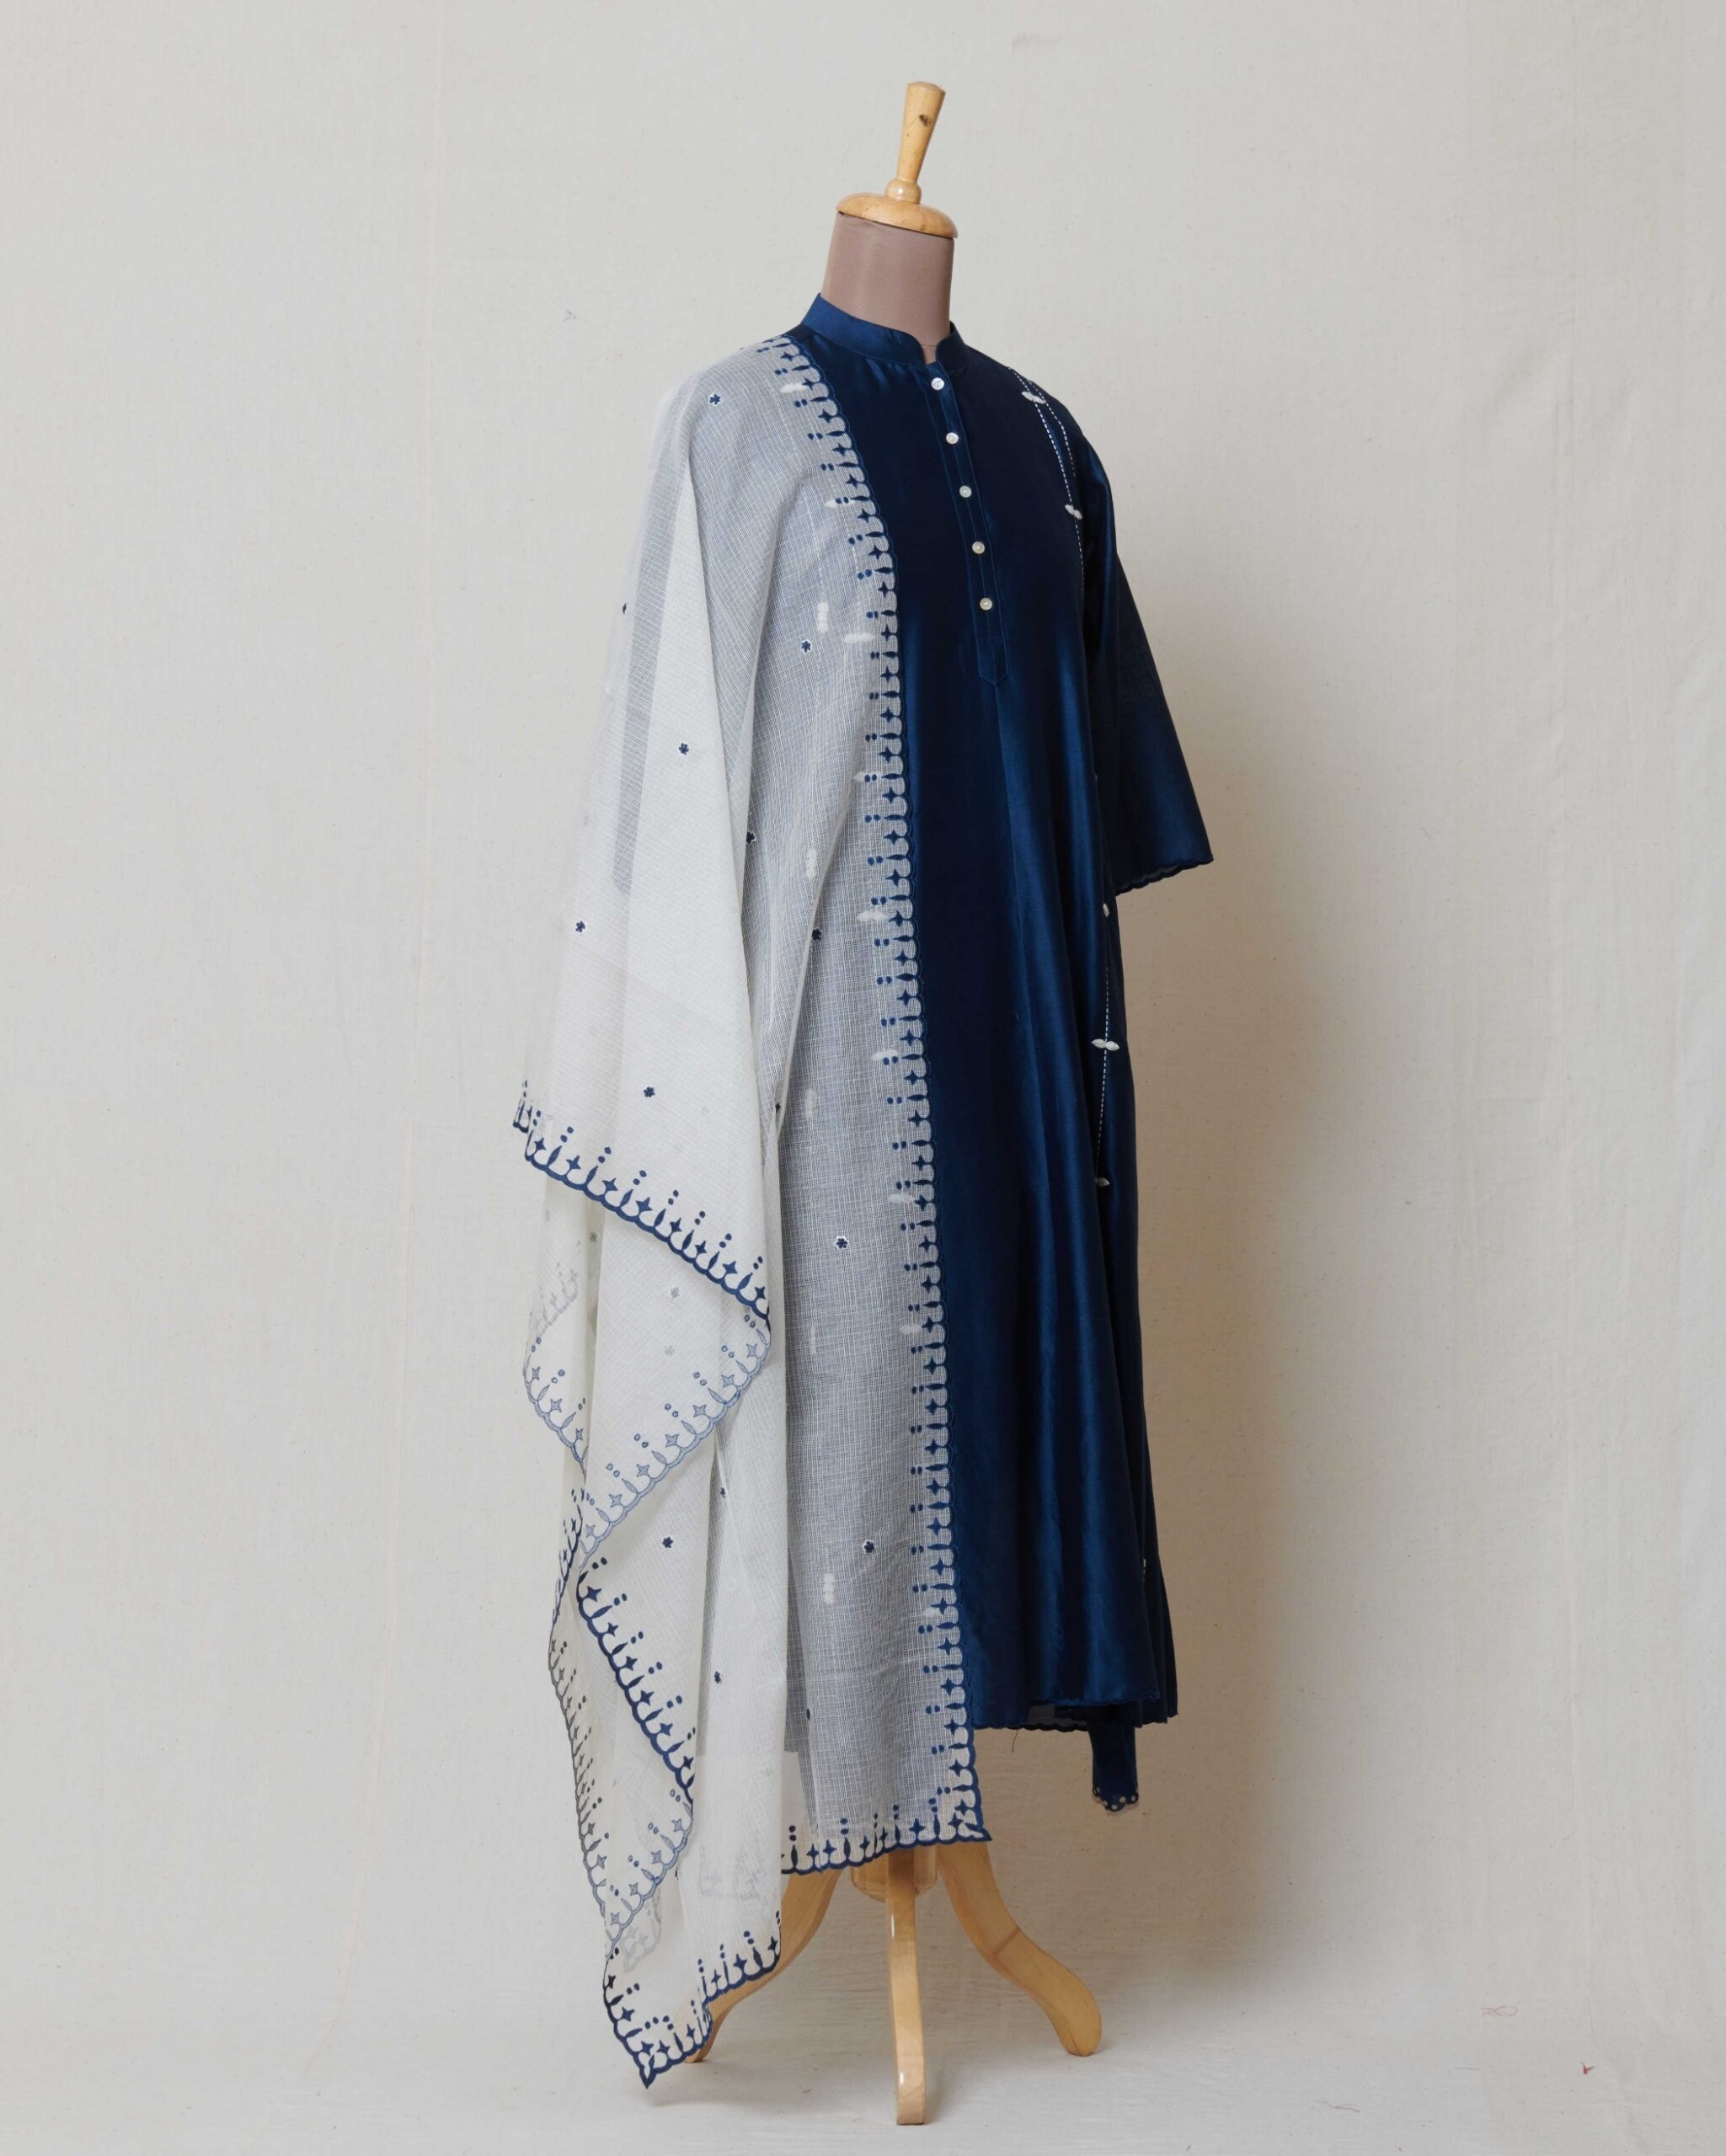 Ivory moonga kota doria dupatta with indigo applique border and highlighted with dull gold and rust butis